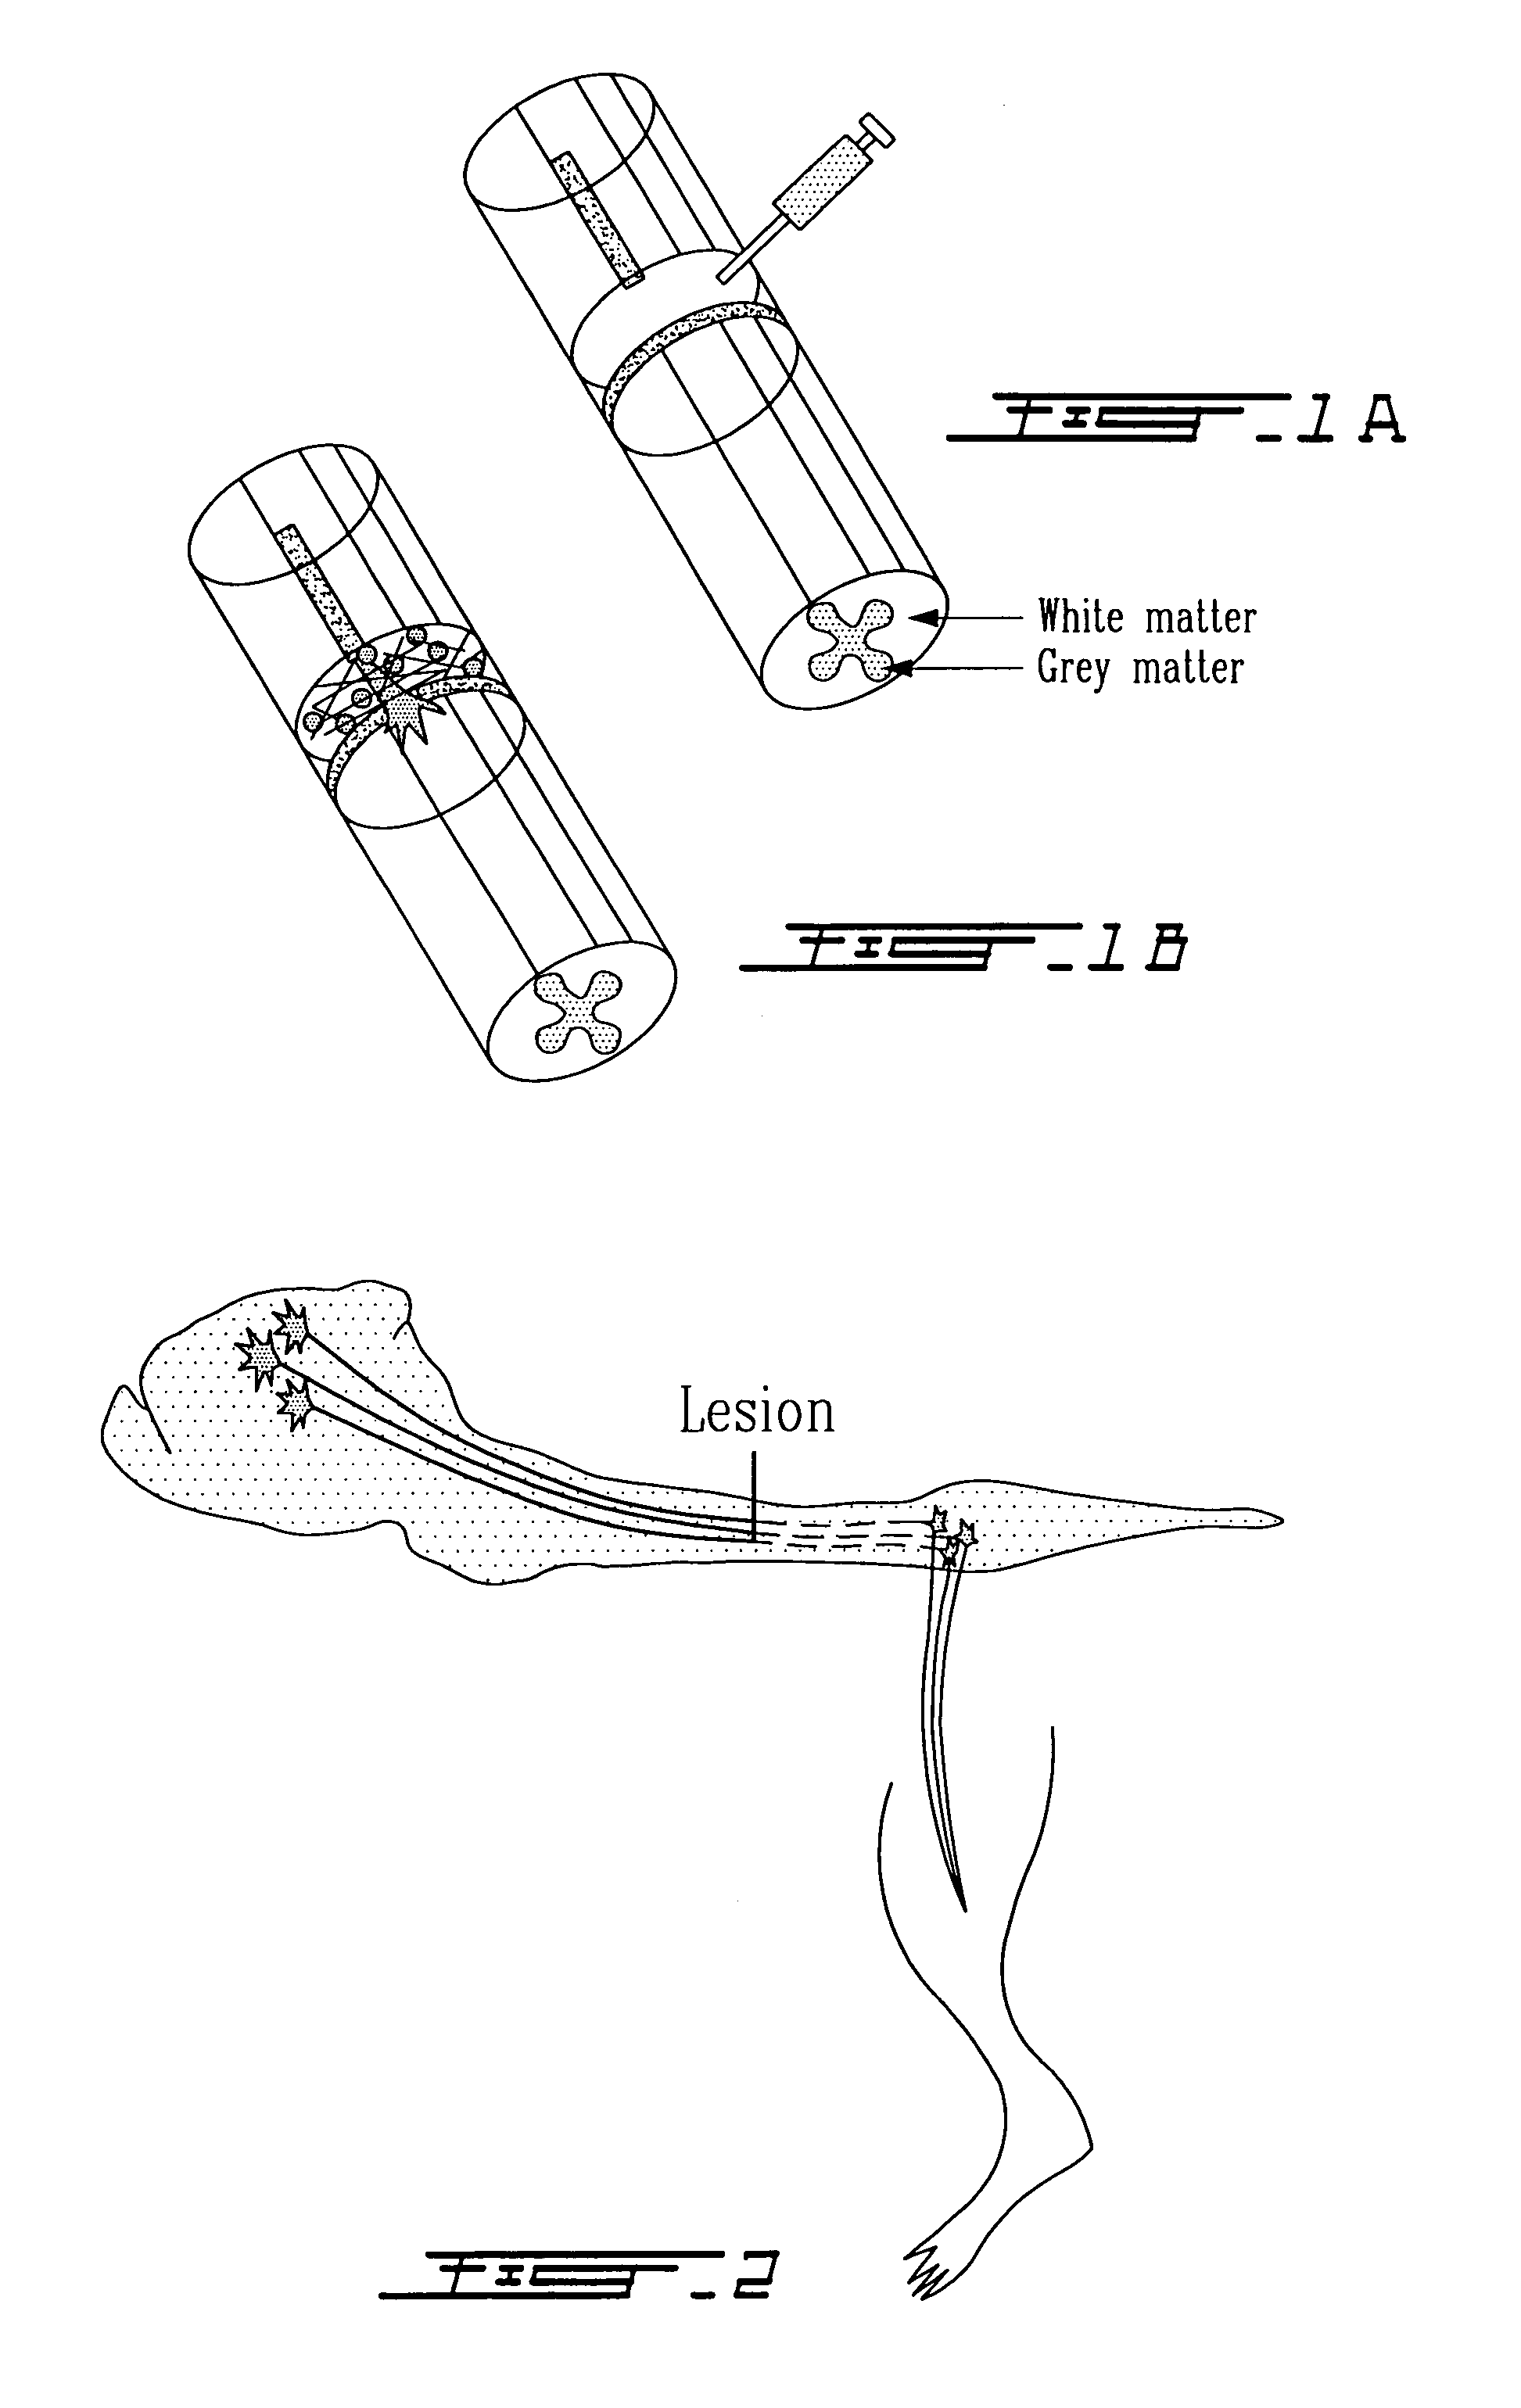 Methods for making and delivering rho-antagonist tissue adhesive formulations to the injured mammalian central and peripheral nervous systems and uses thereof